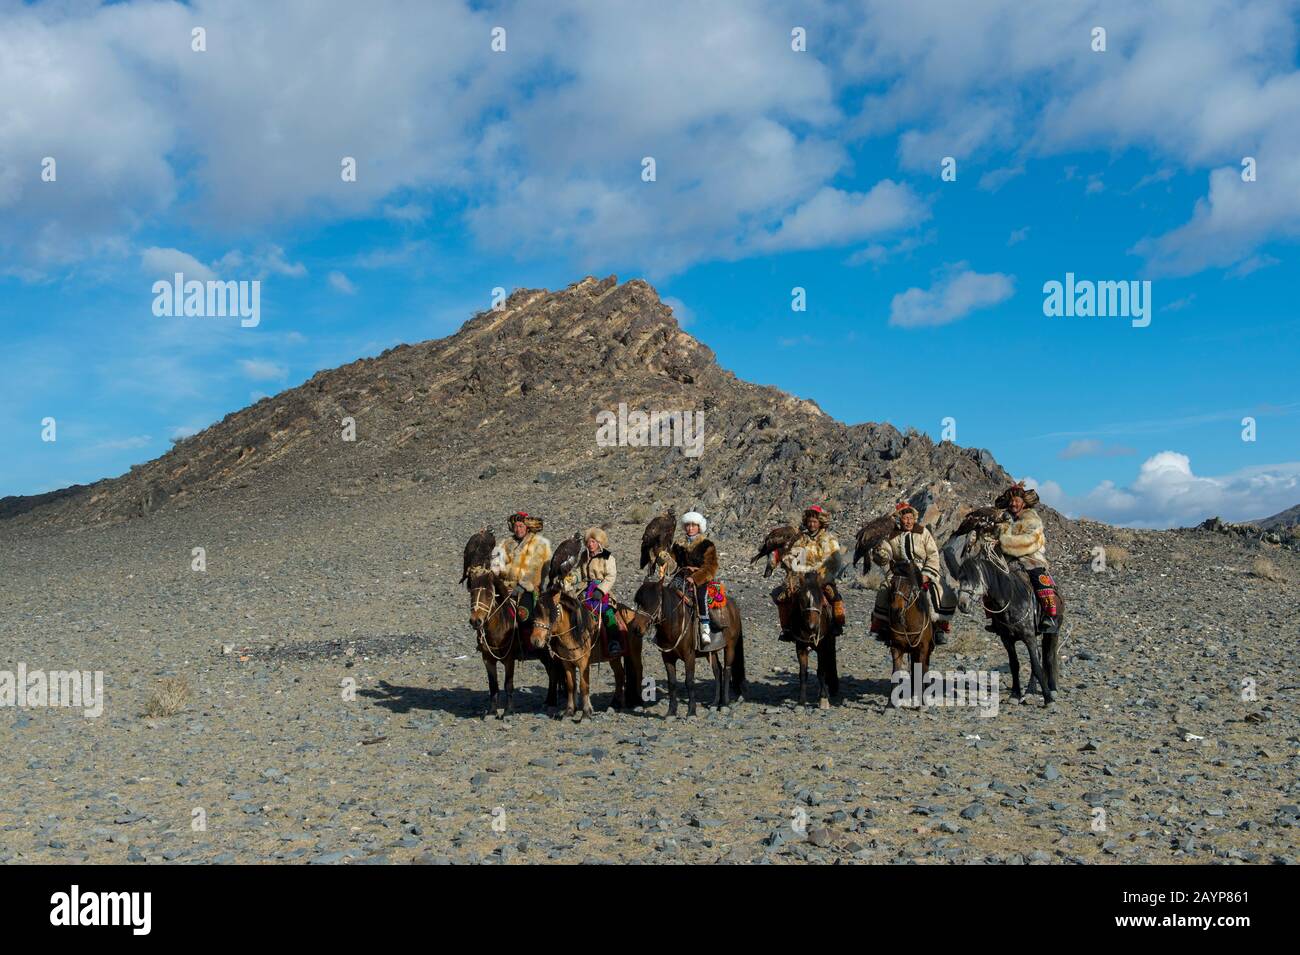 A group of Kazakh Eagle hunters and their Golden eagles on horseback on the way to the Golden Eagle Festival near the city of Ulgii (Ölgii) in the Bay Stock Photo